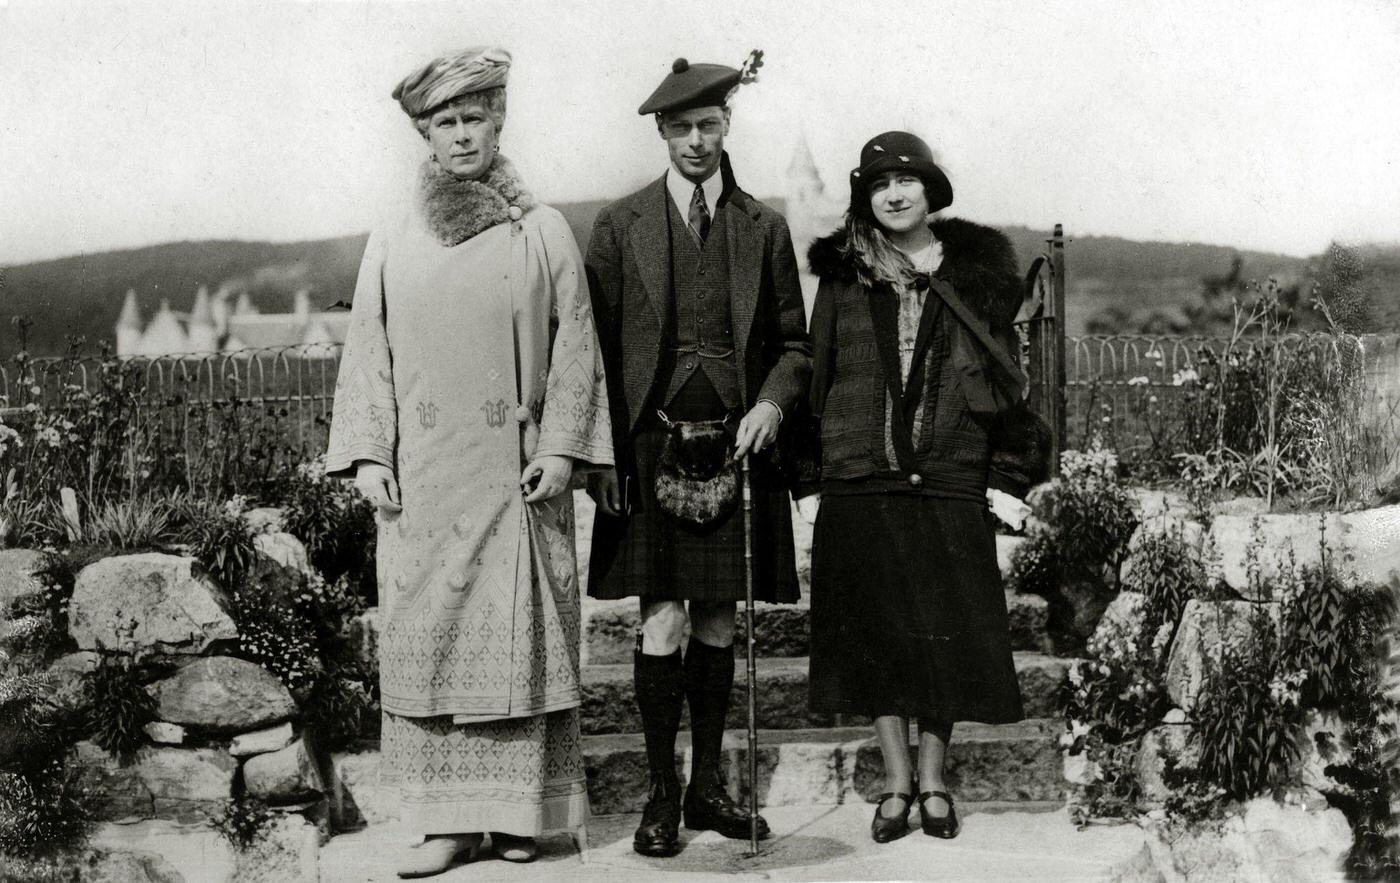 The Duke and Duchess of York pictured with Queen Mary at the Balmoral estate in Scotland, 1952